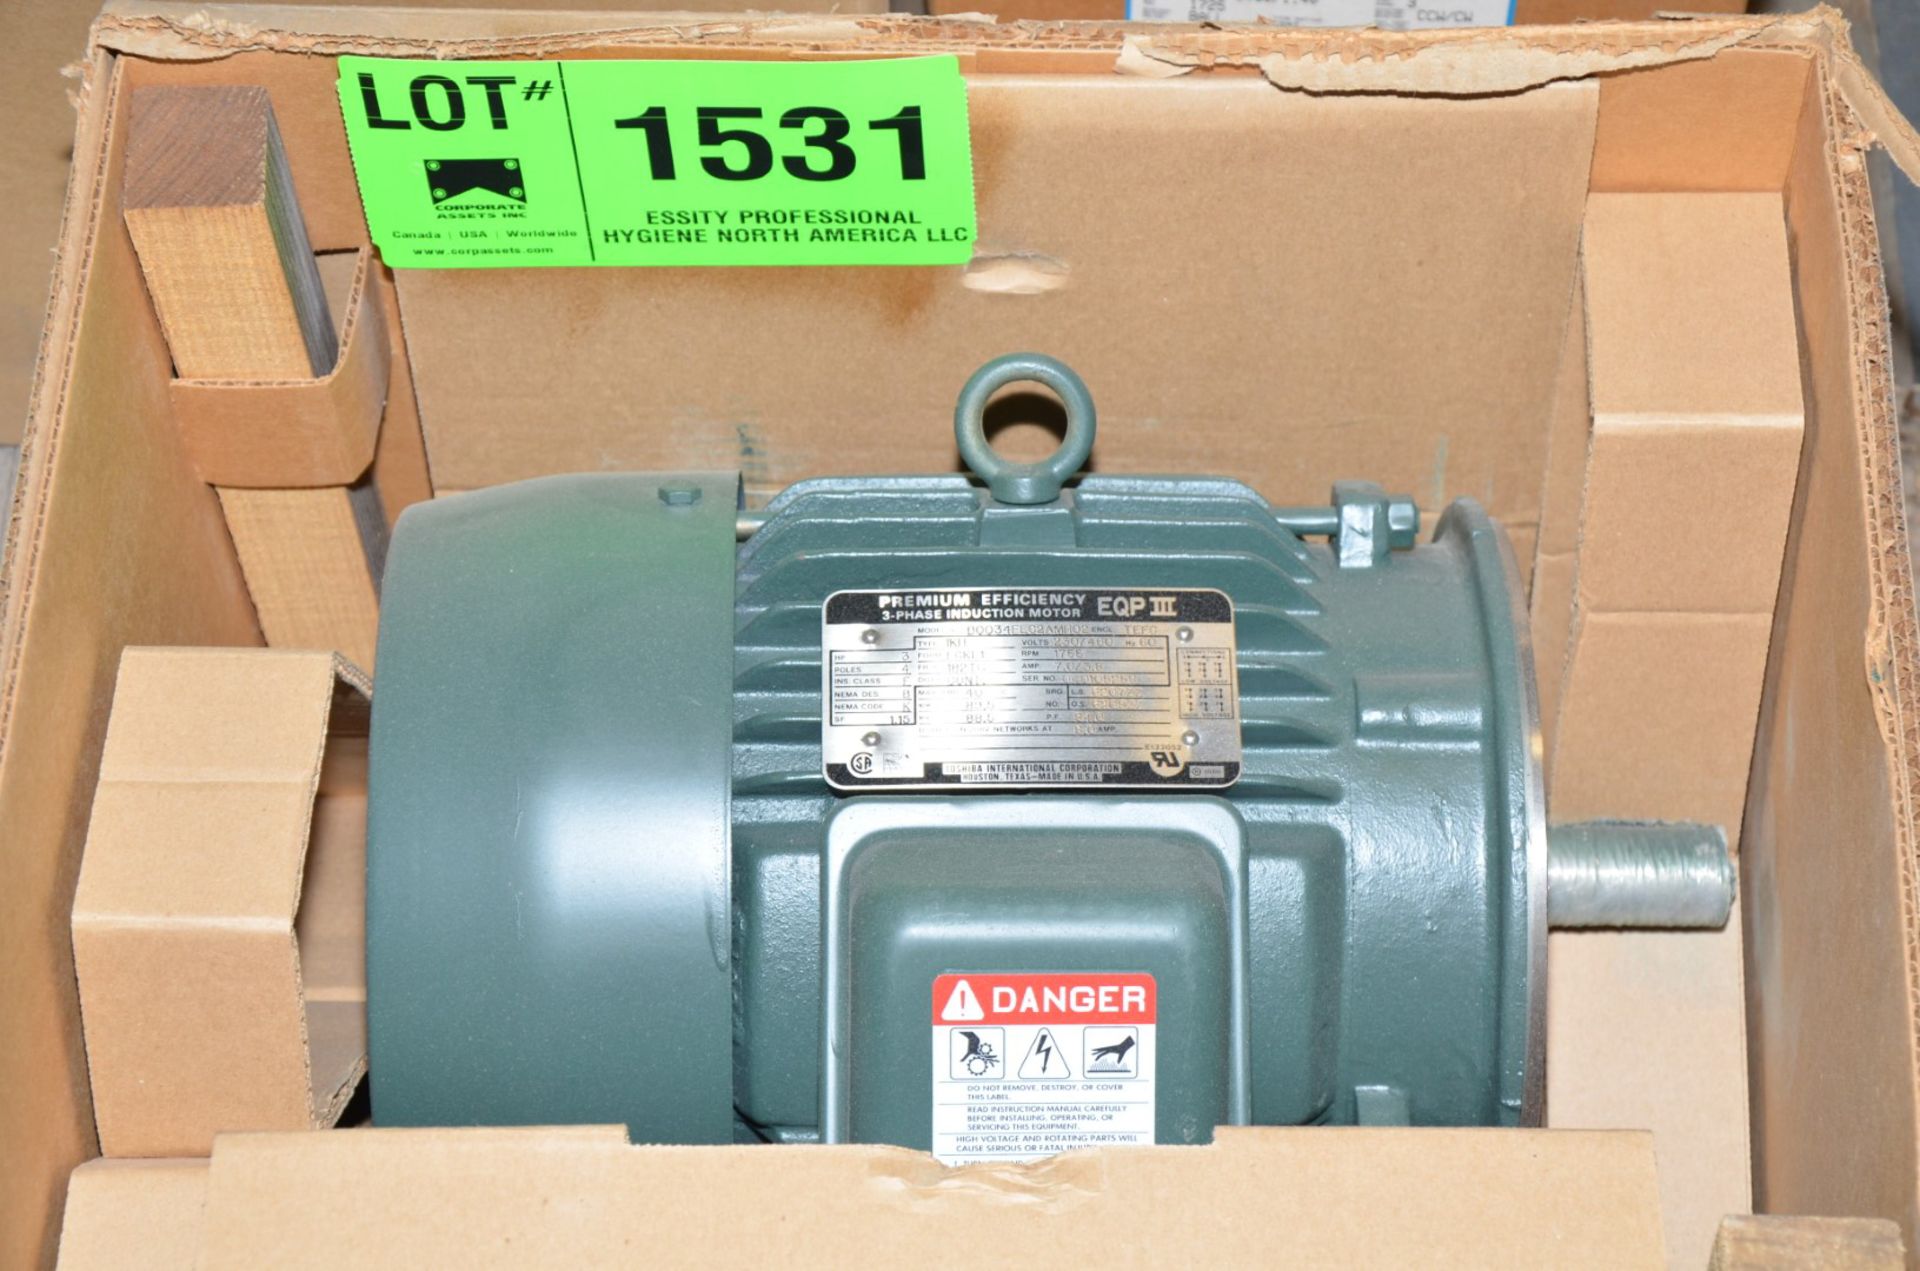 TOSHIBA 3 HP 1755 RPM 460V ELECTRIC MOTOR [RIGGING FEE FOR LOT #1531 - $25 USD PLUS APPLICABLE